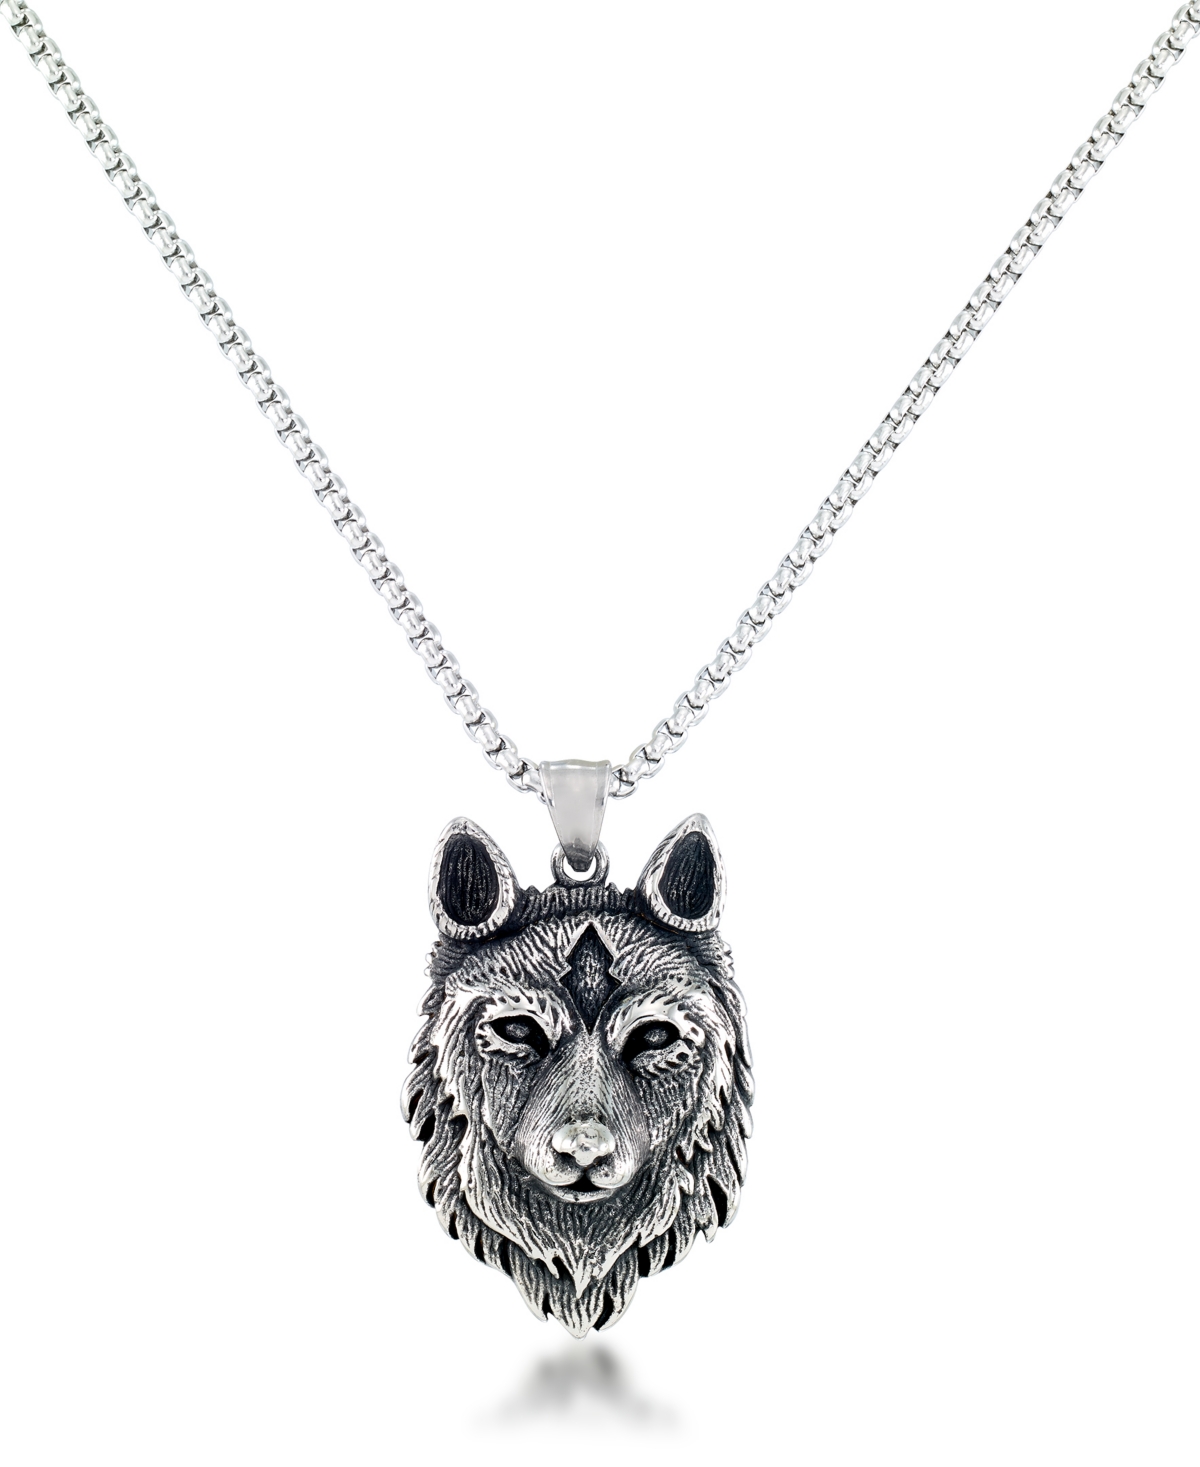 Men's Wolf Head 24" Pendant Necklace in Stainless Steel - Stainless Steel